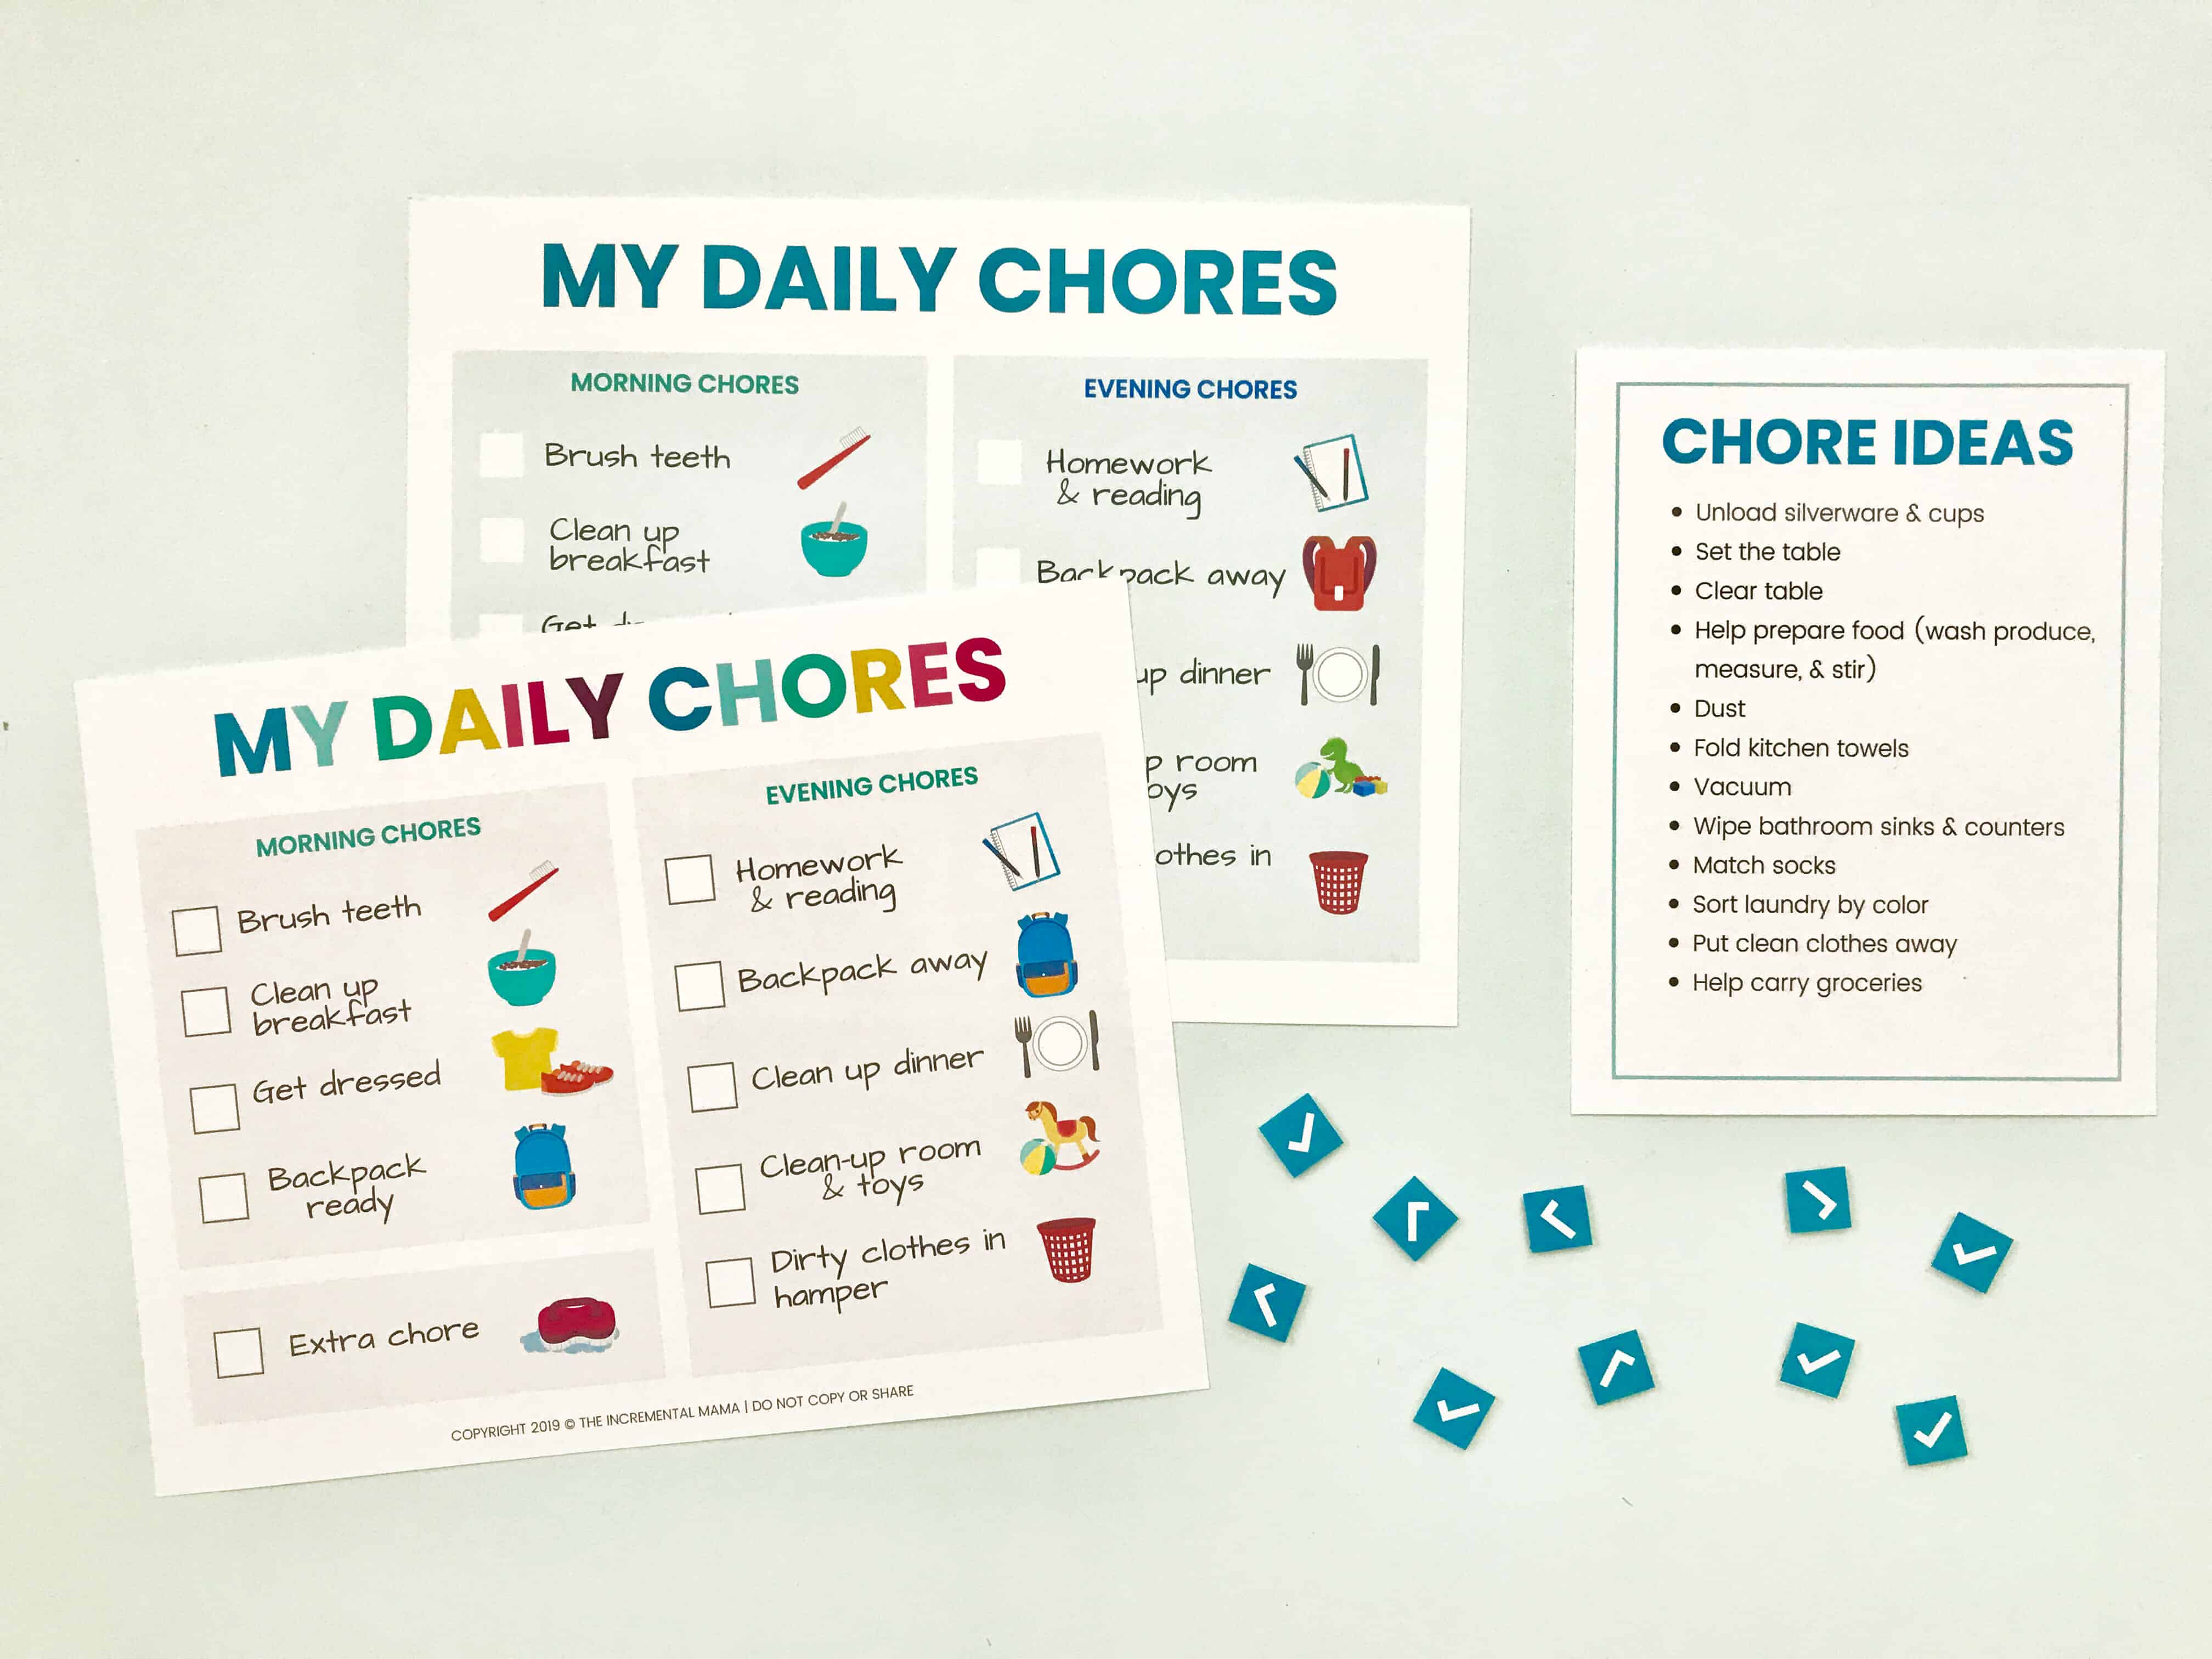 free printable chore chart for 5 year old